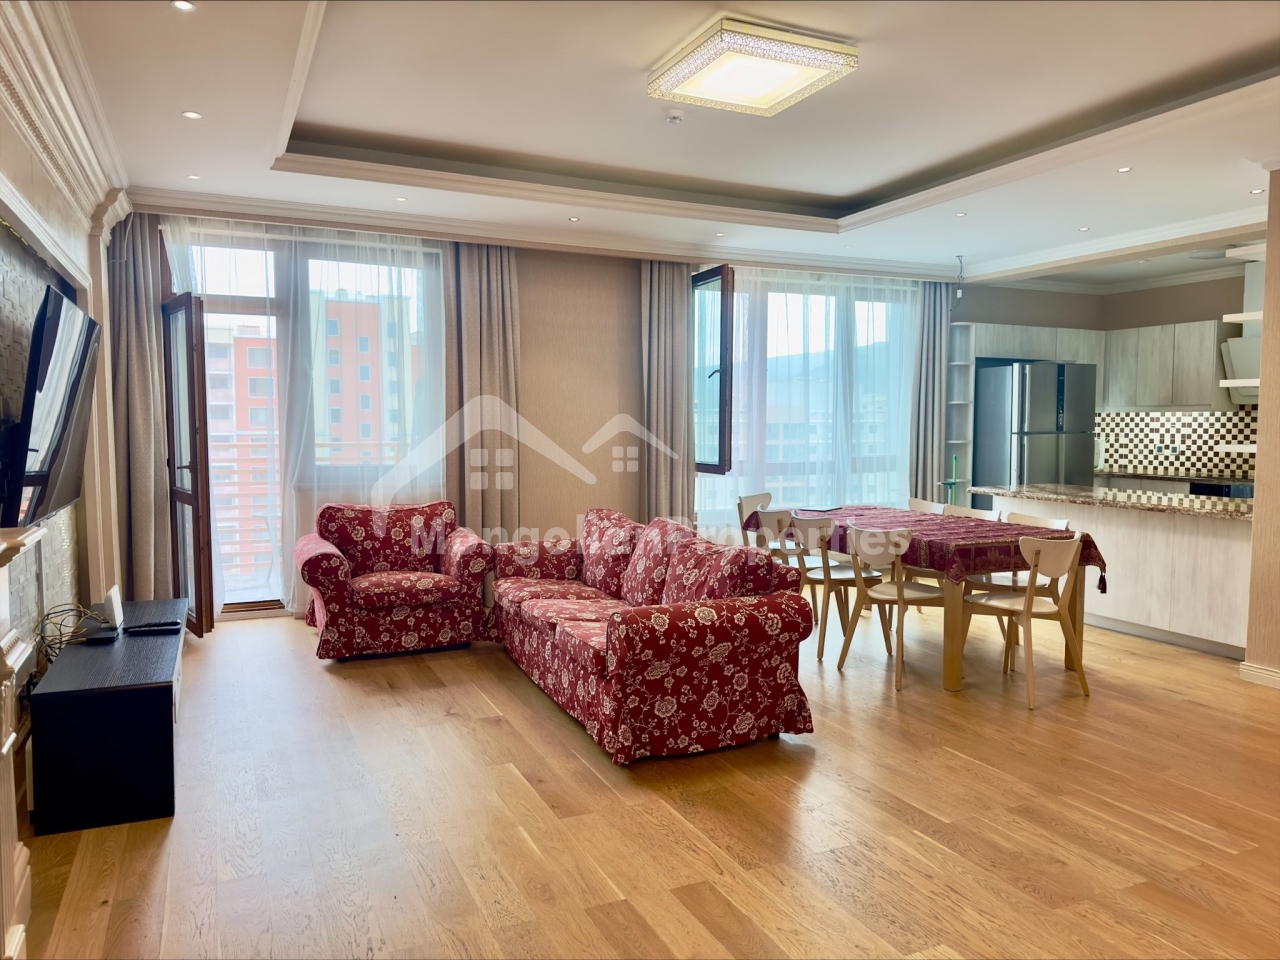 fully furnished, beautiful 3 bedroom apartment for rent next to the river garden